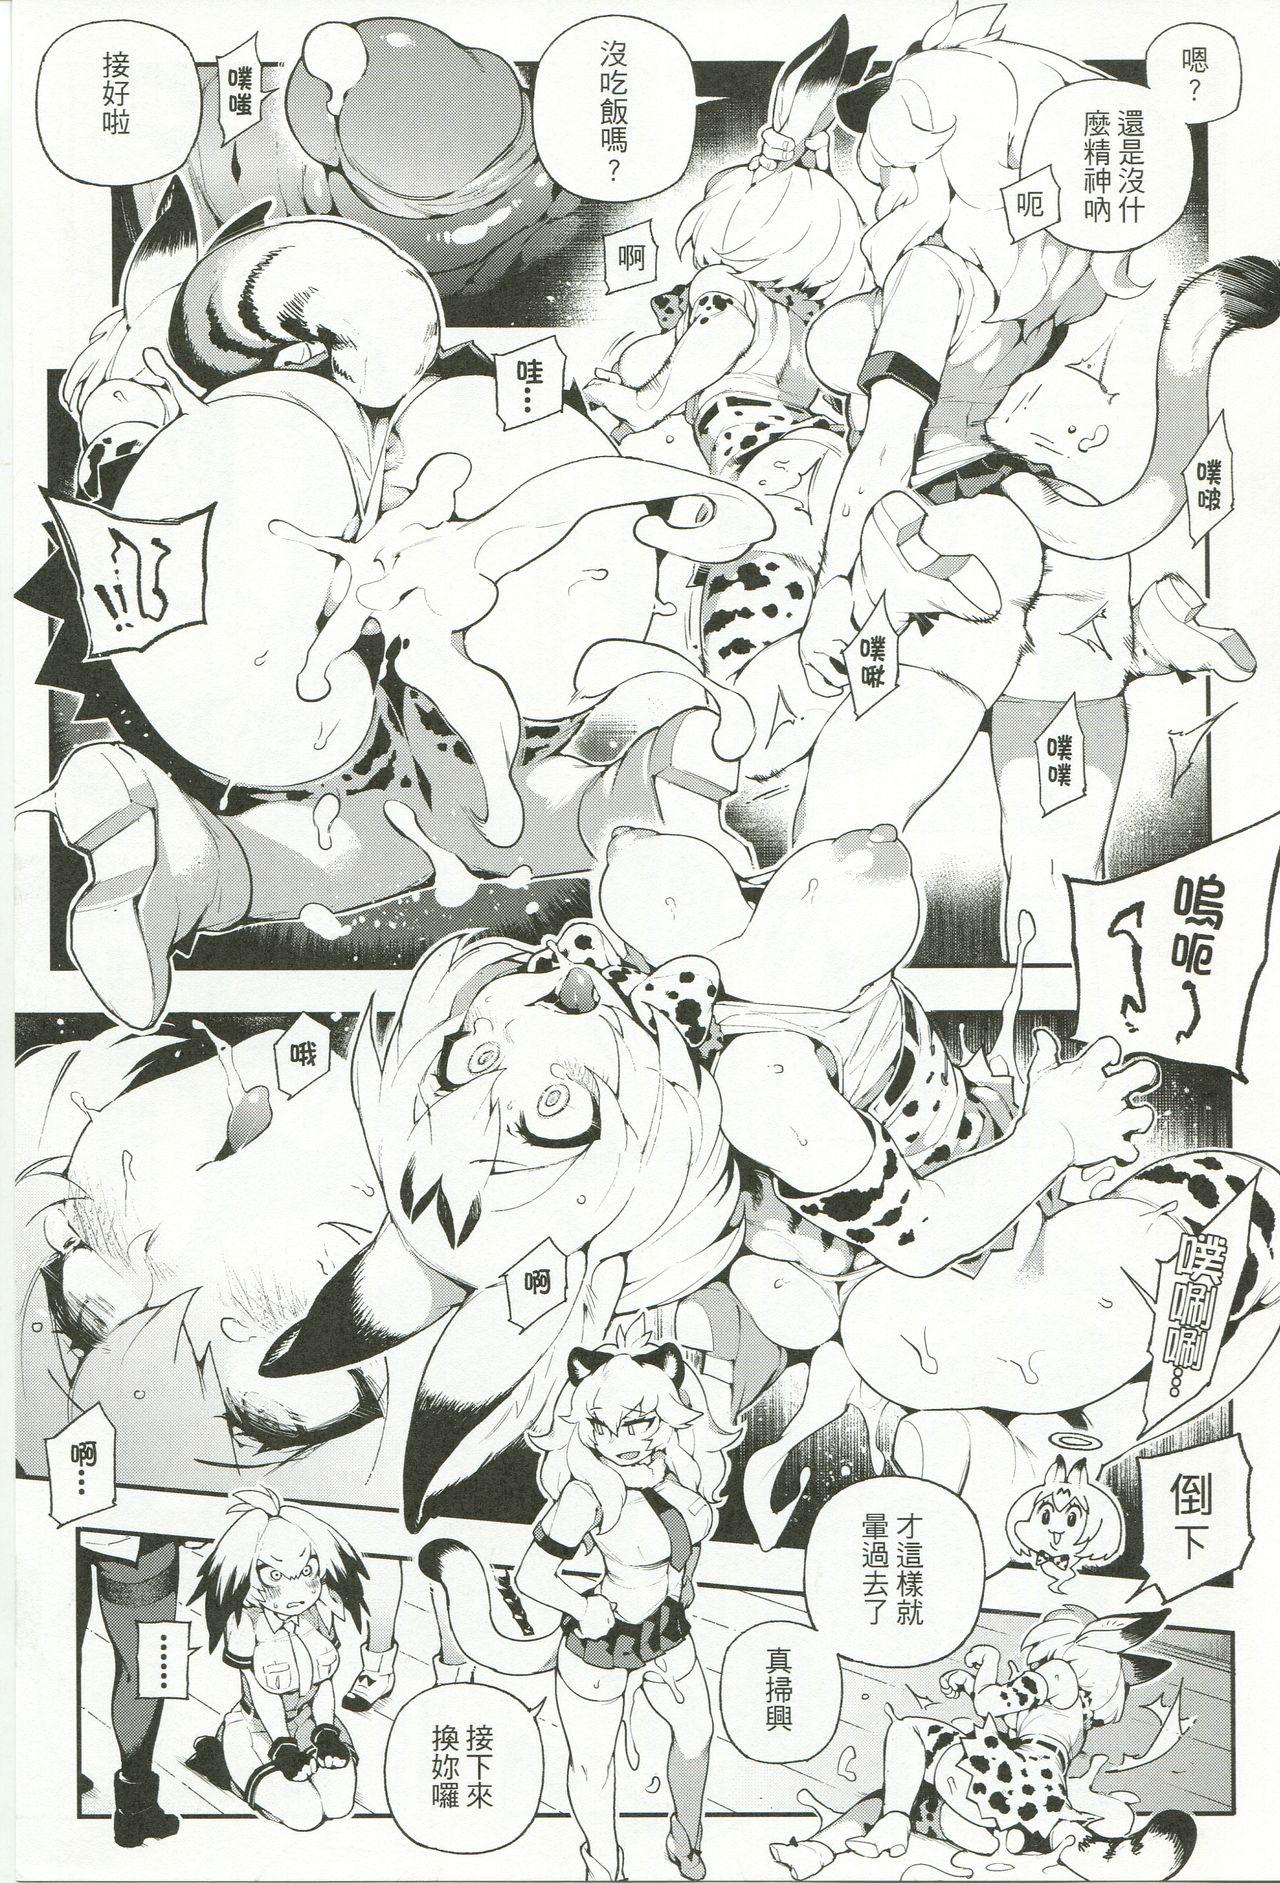 Magrinha BEAST FRIENDS - Kemono friends Gay Outinpublic - Page 11